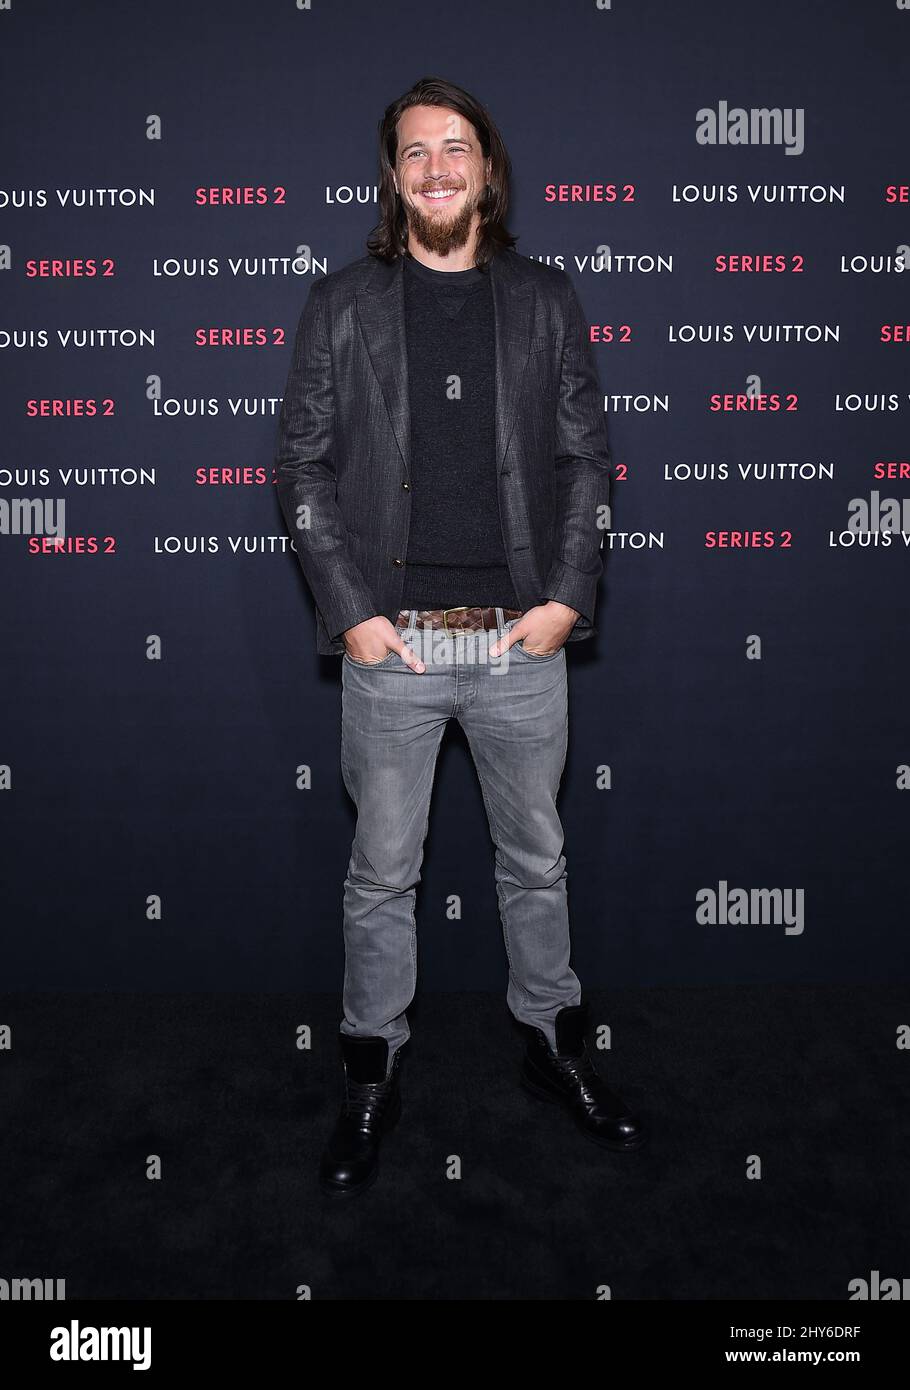 Ben Robson attends an event called, Louis Vuitton unveils an unconventional exhibition, 'SERIES 2 ??? Past, Present and Future'. This exhibition is a modern and unexpected interpretation of a fashion show. February 5, 2015 Los Angeles, Ca. Stock Photo